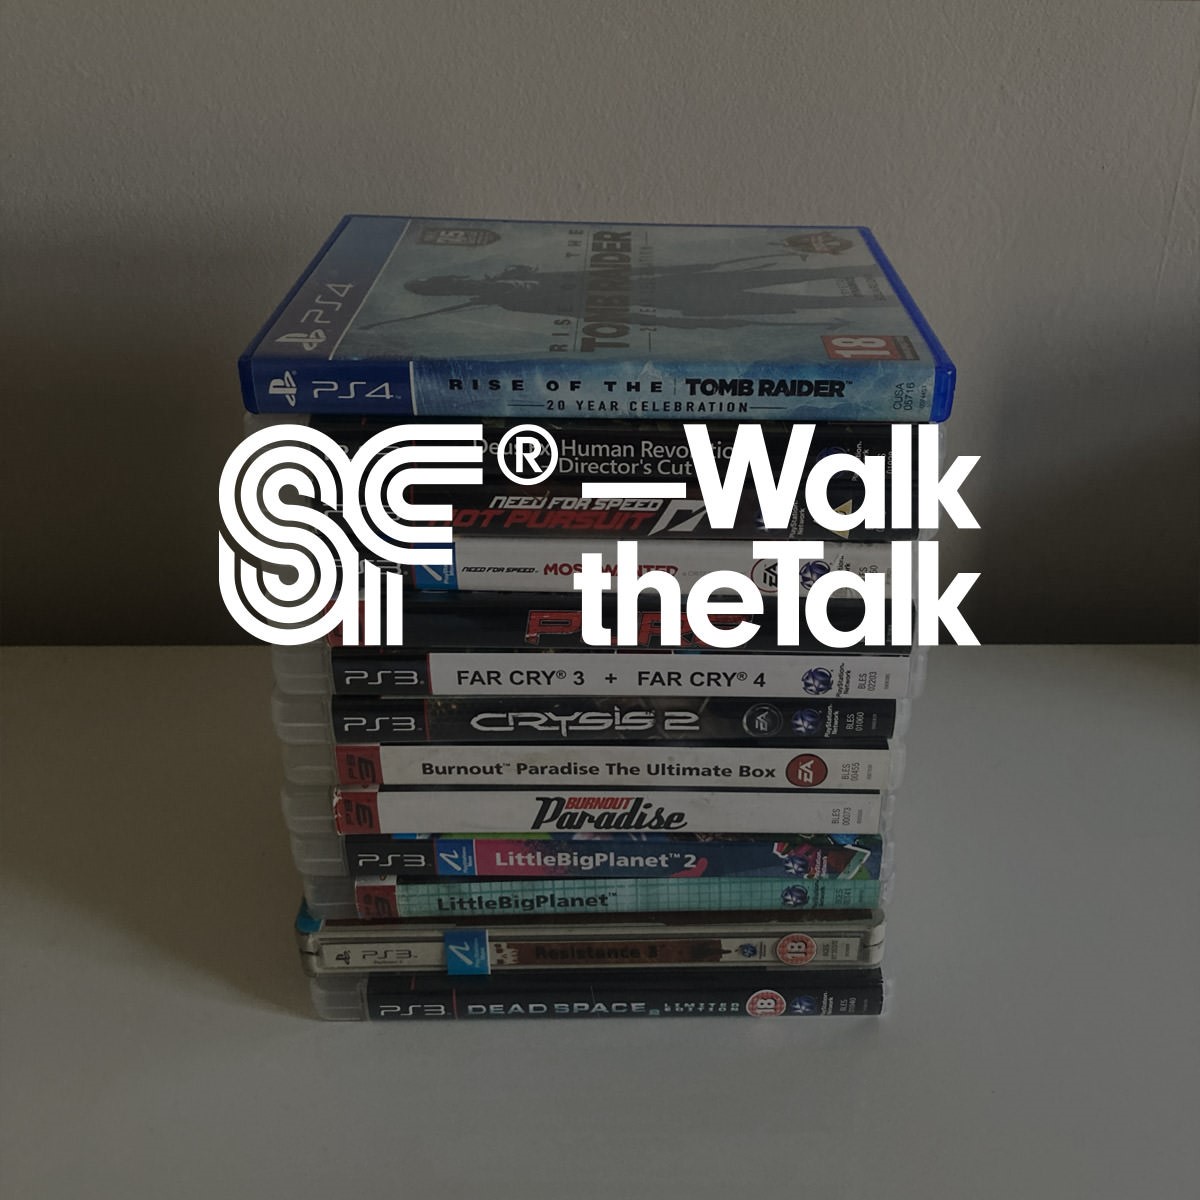 Superfried – Walk the Talk logo. Buying secondhand console games from Music Magpie. Considering purchases to reduce my environmental impact.